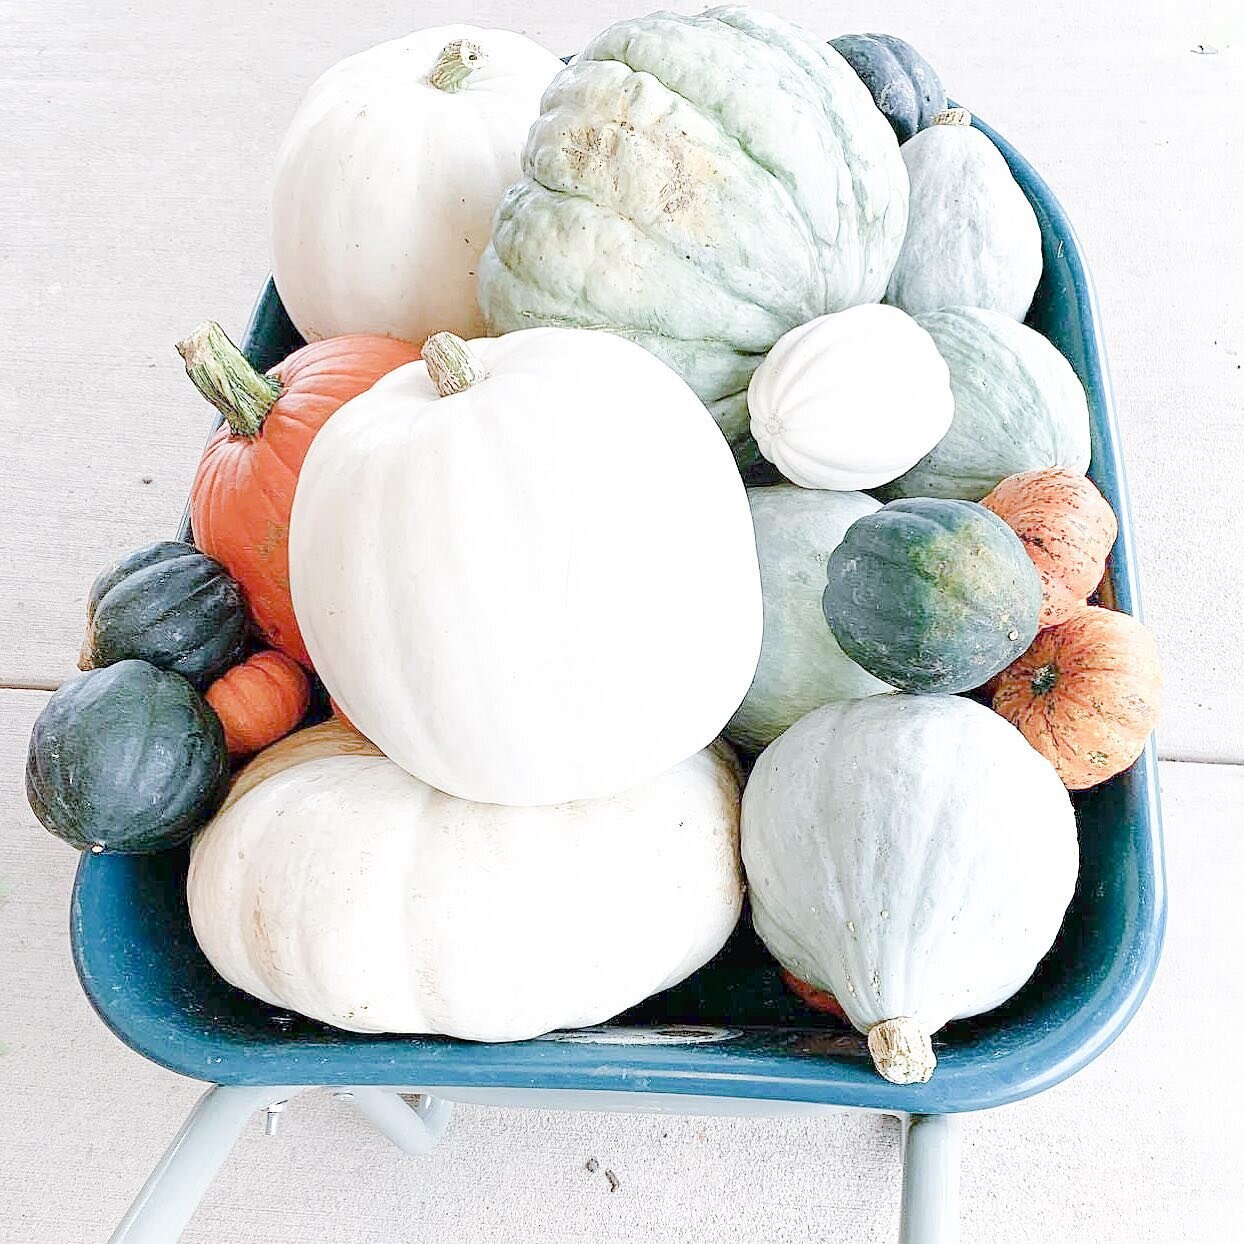 Yay for beautiful pumpkins, and a beautiful fall day spent with my husband and our four little pumpkins 👧🏻👦🏻👶🏻👶🏻 !! Hope everyone had a wonderful Saturday! I cant wait to get these pumpkins inside and start decorating! 

#falldecor #fallvibes